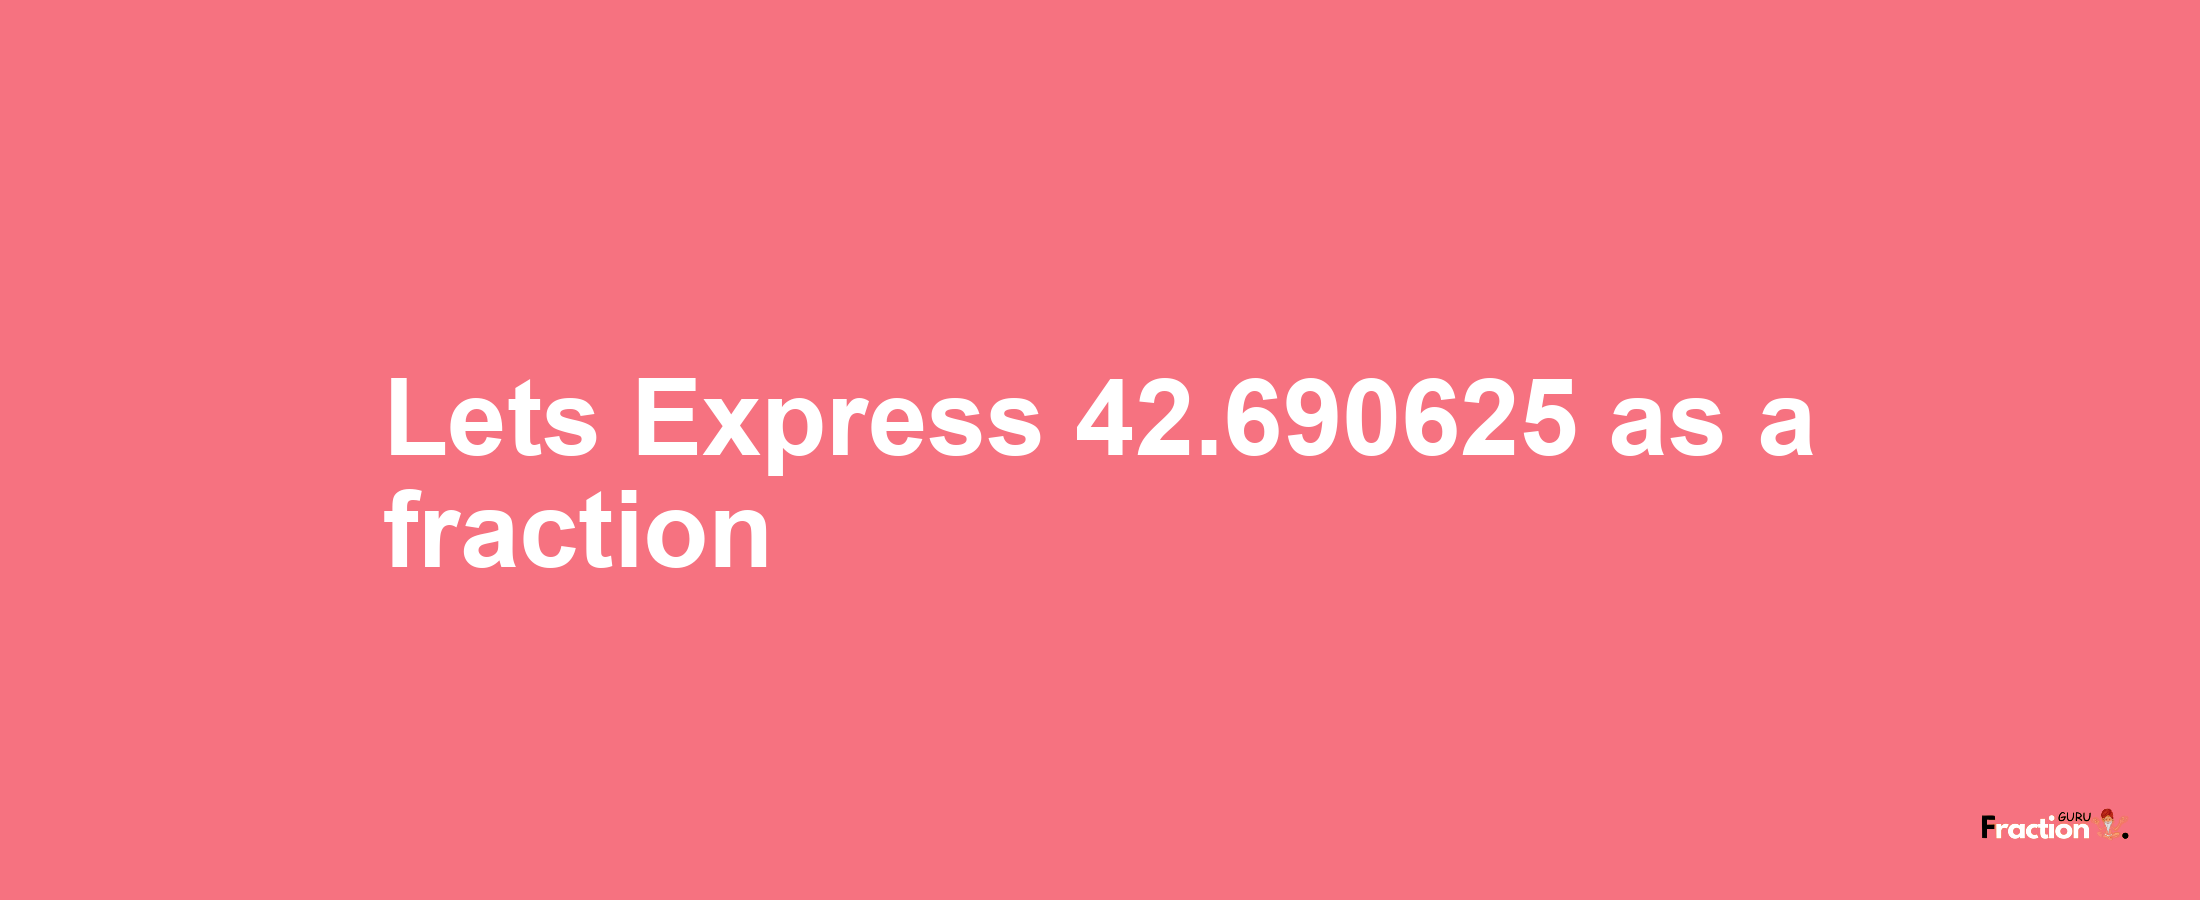 Lets Express 42.690625 as afraction